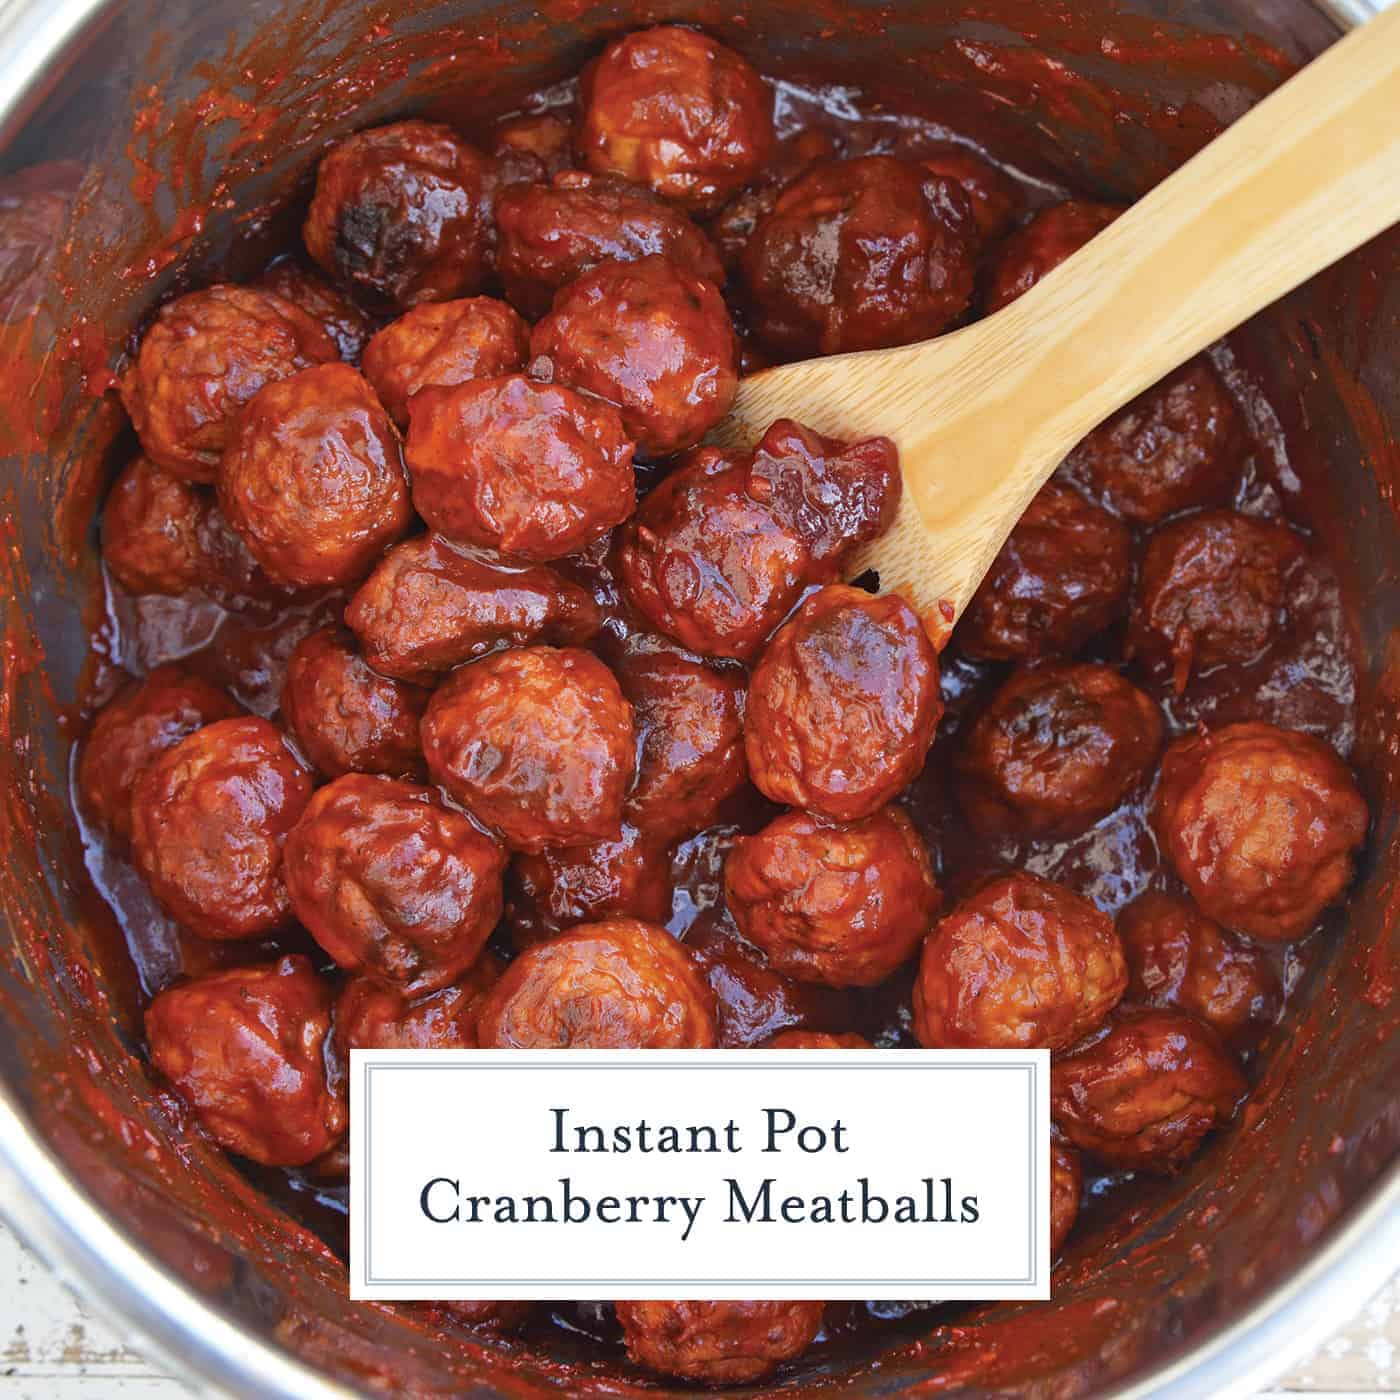 These Cranberry Chili Meatballs, made with only 4 ingredients, will become your go-to cocktail meatballs recipe! The perfect appetizer for any gathering! #partymeatballs #instantpotmeatballs #cocktailmeatballs www.savoryexperiments.com